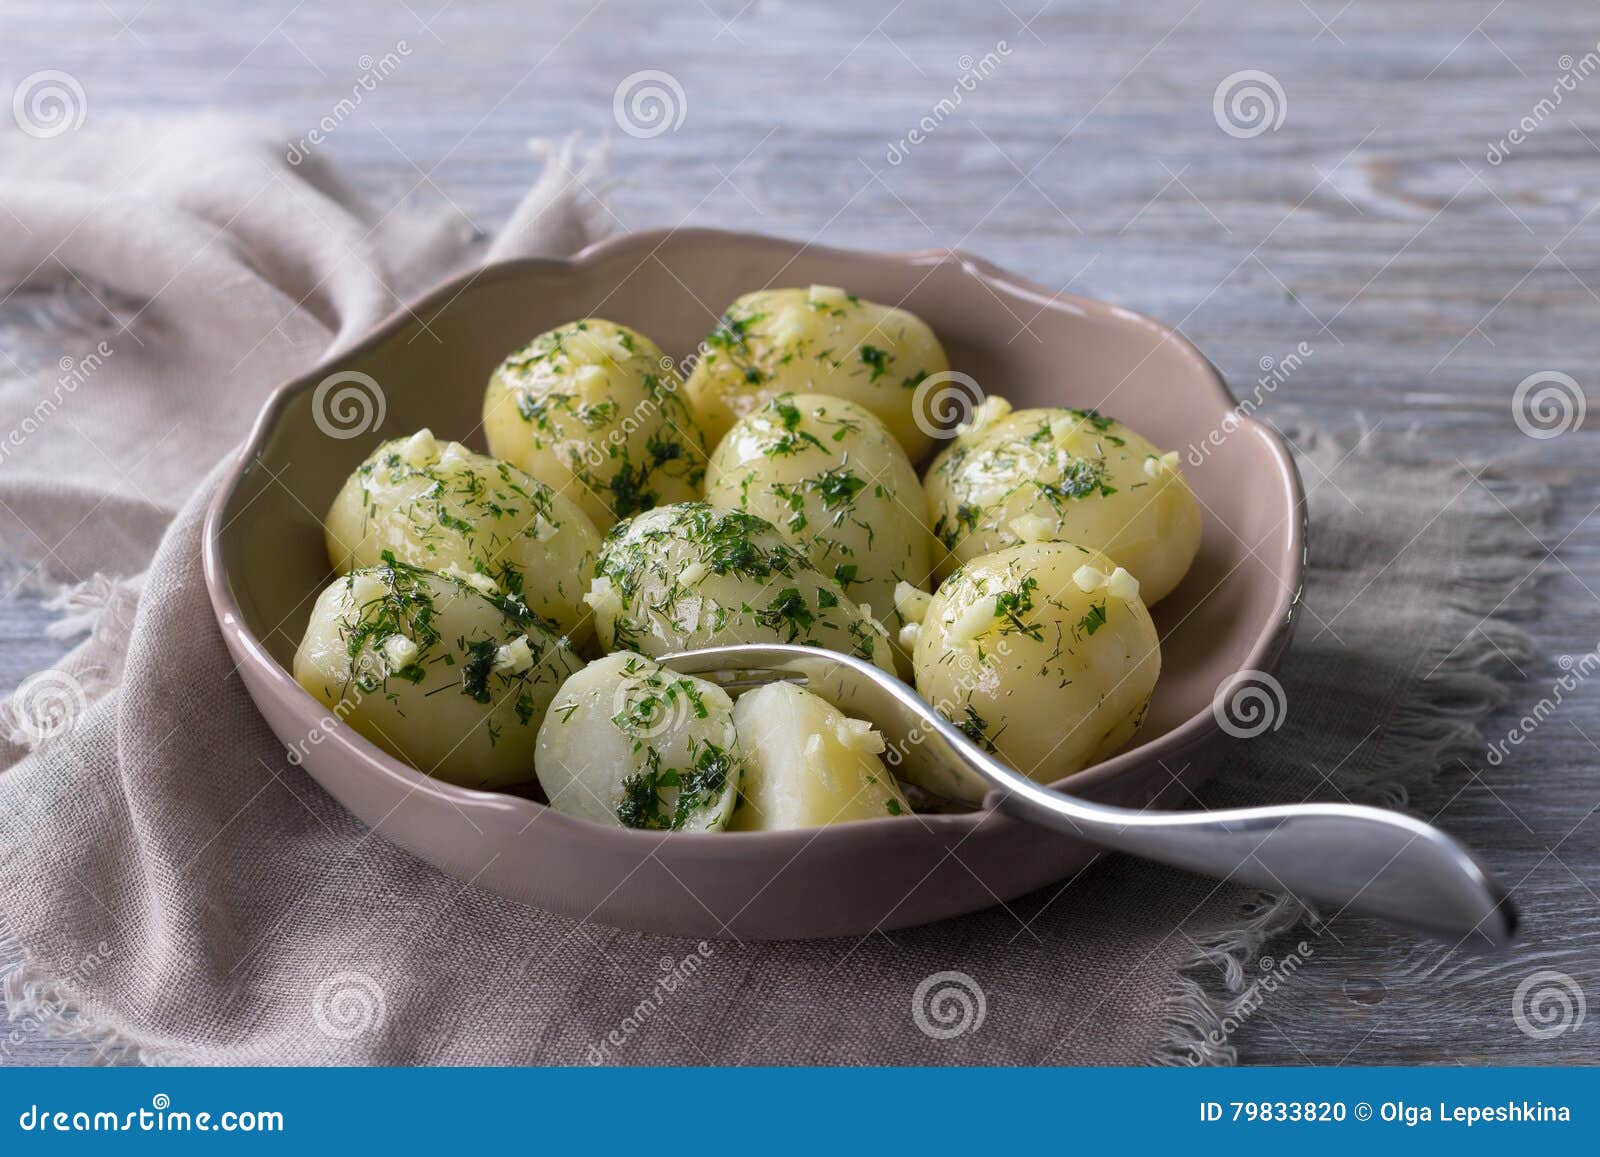 Boiled Potatoes With Herb Butter And Garlic Stock Photo ...